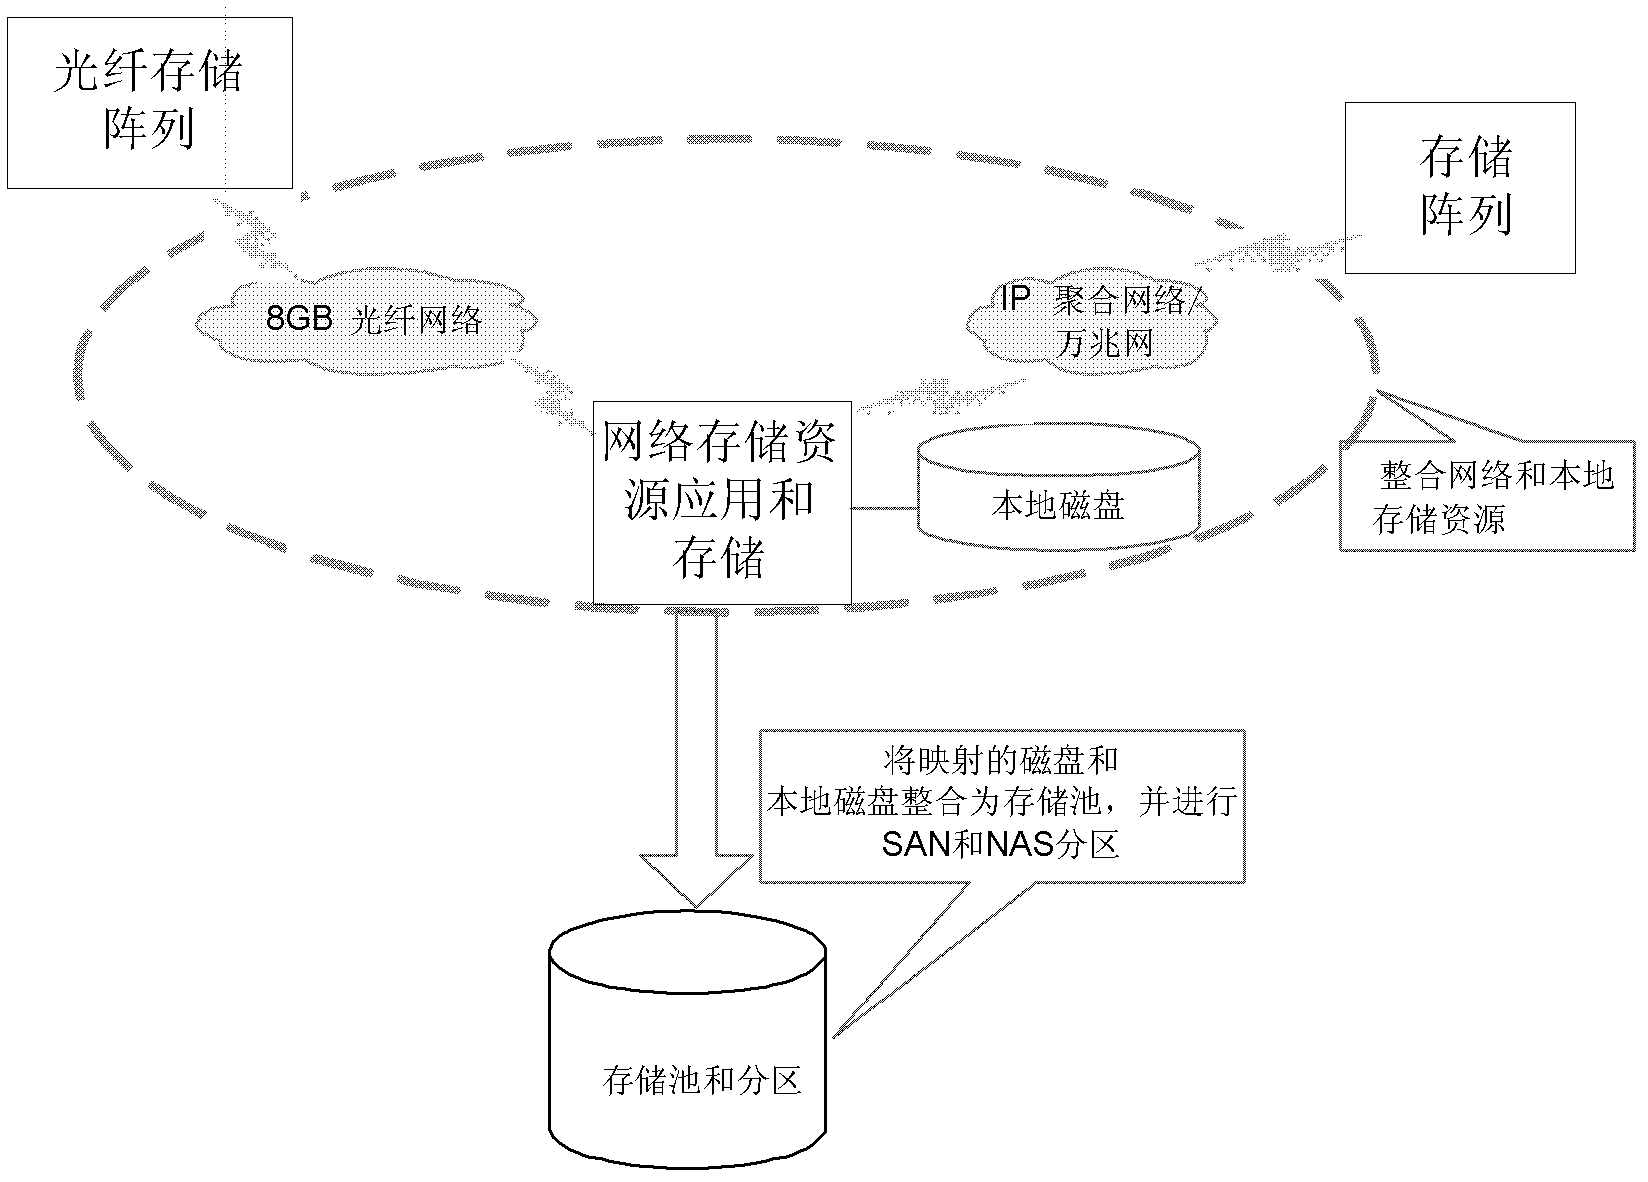 Network storage resource application system and method